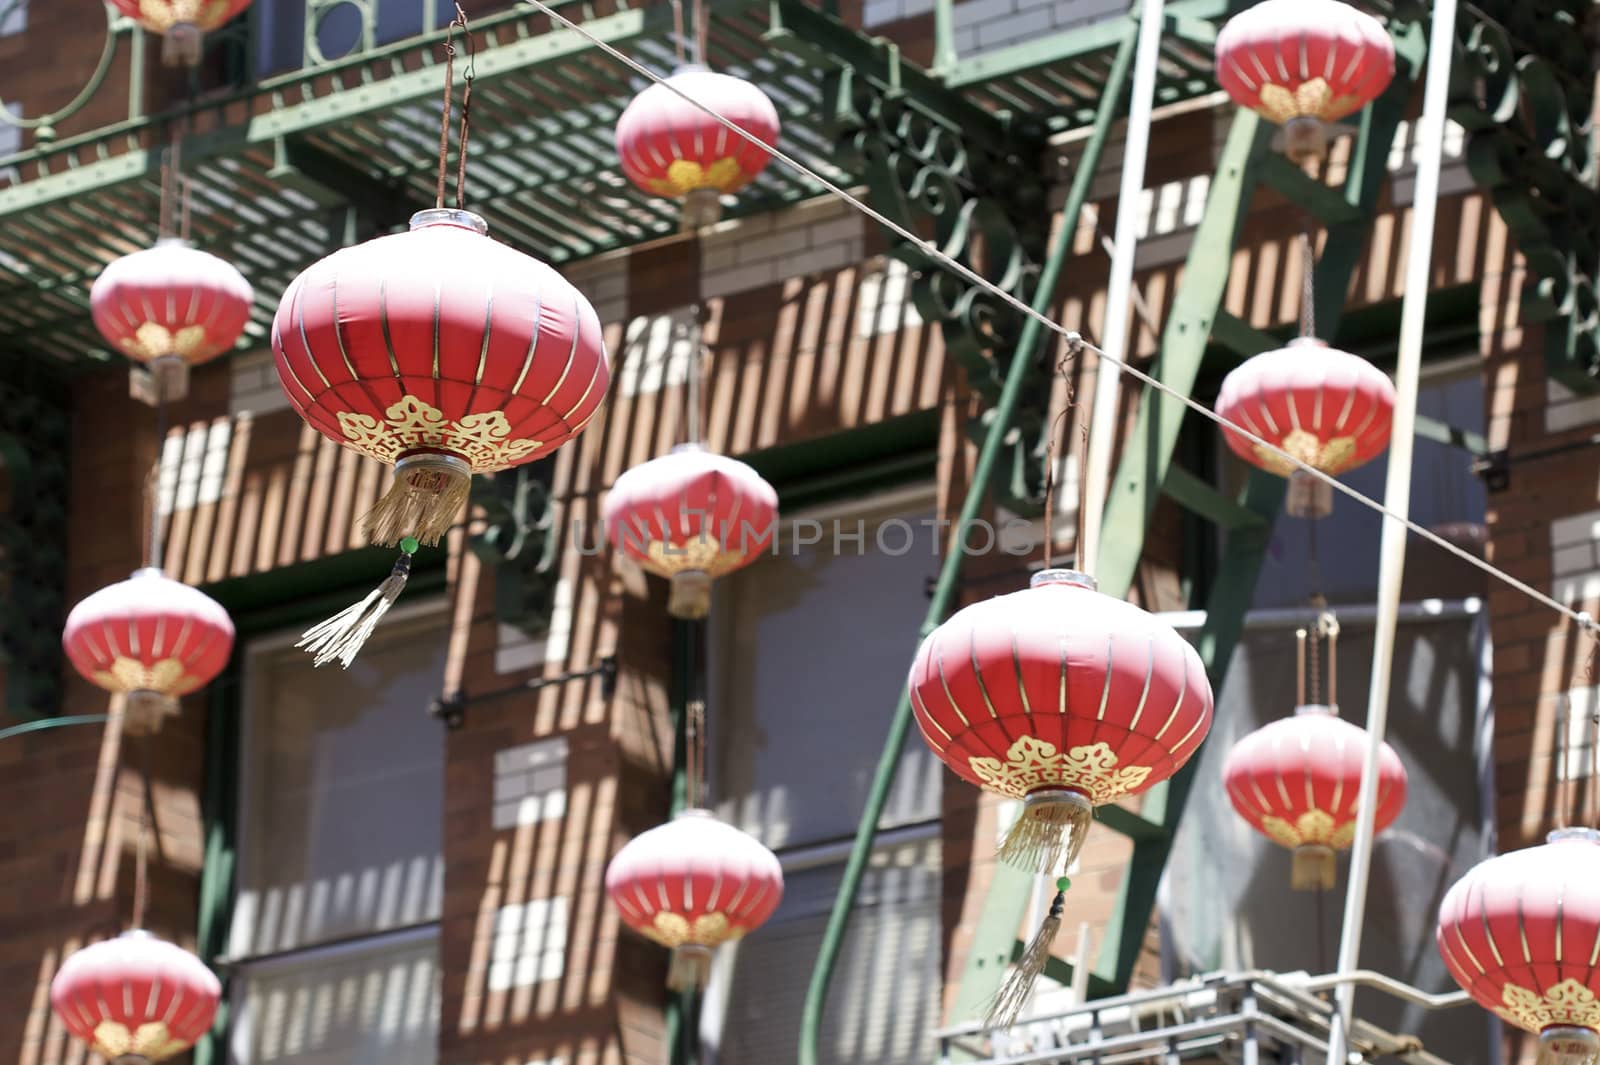 An abstract shot of lamps in China Town, San Francisco.